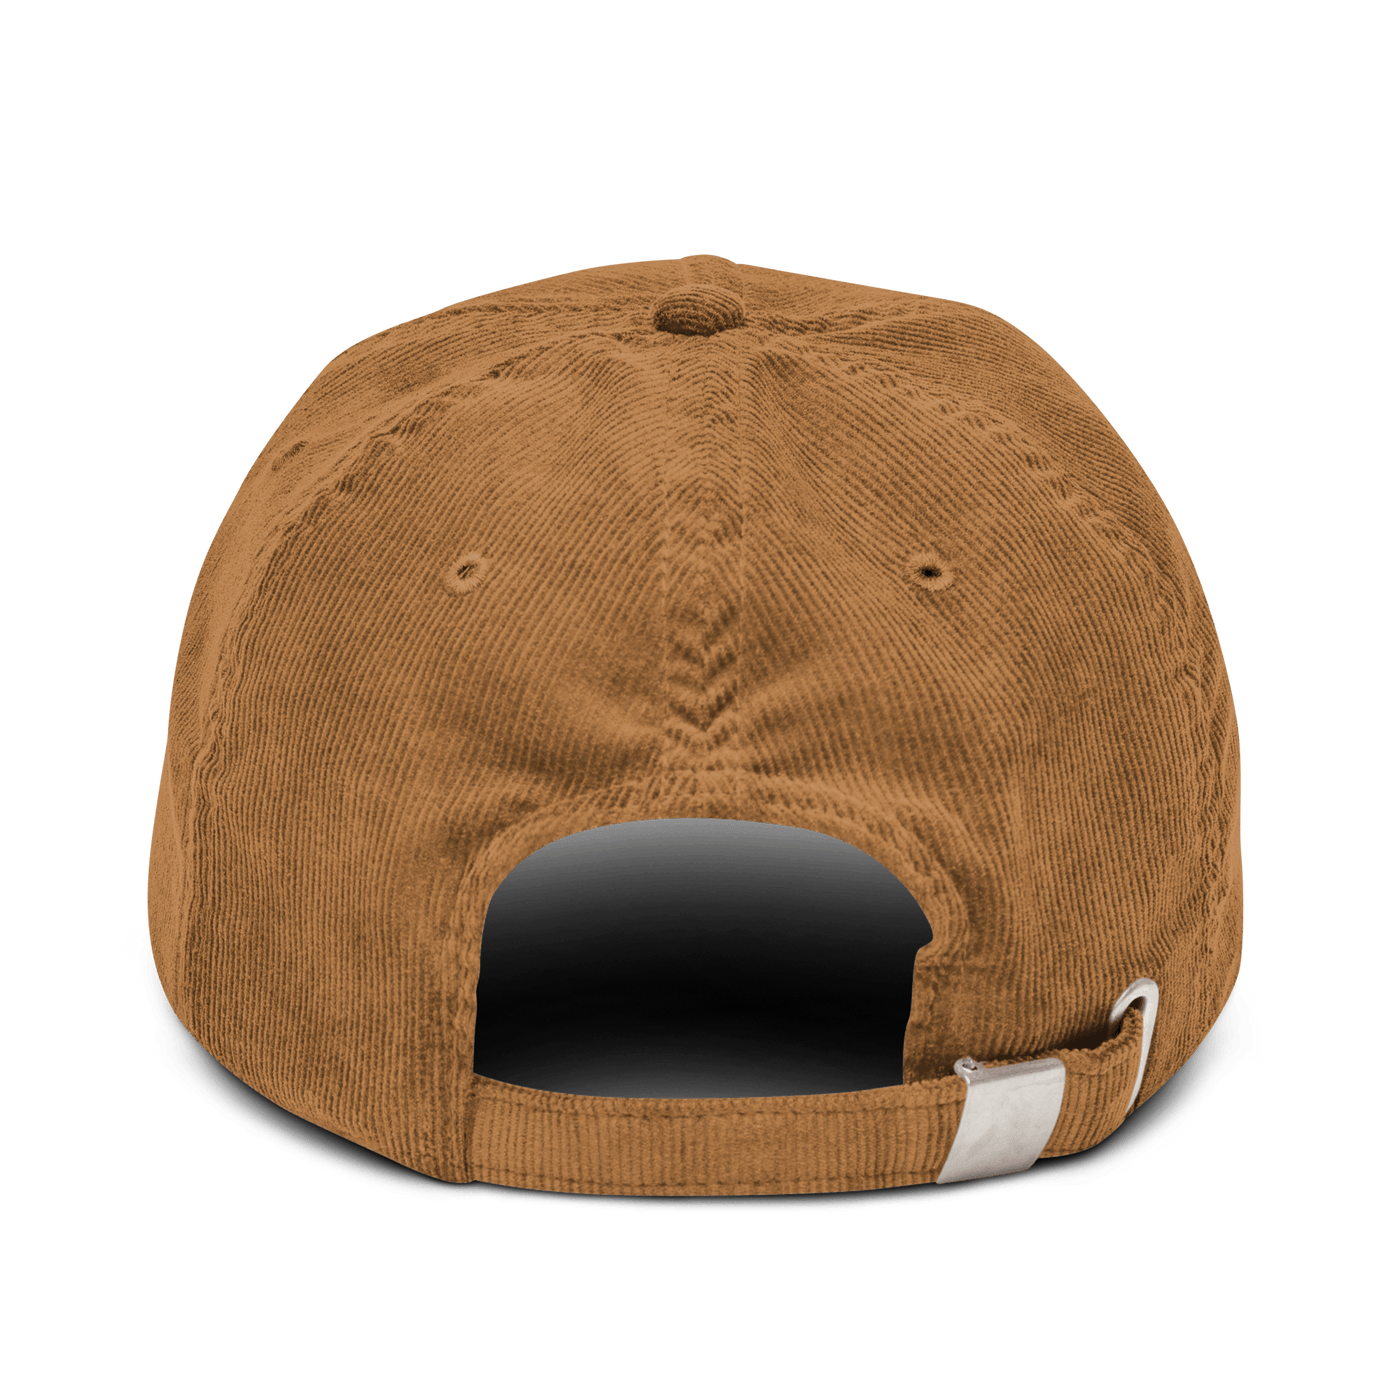 Cold Brew Corduroy hat - Camel - - Just Another Cap Store